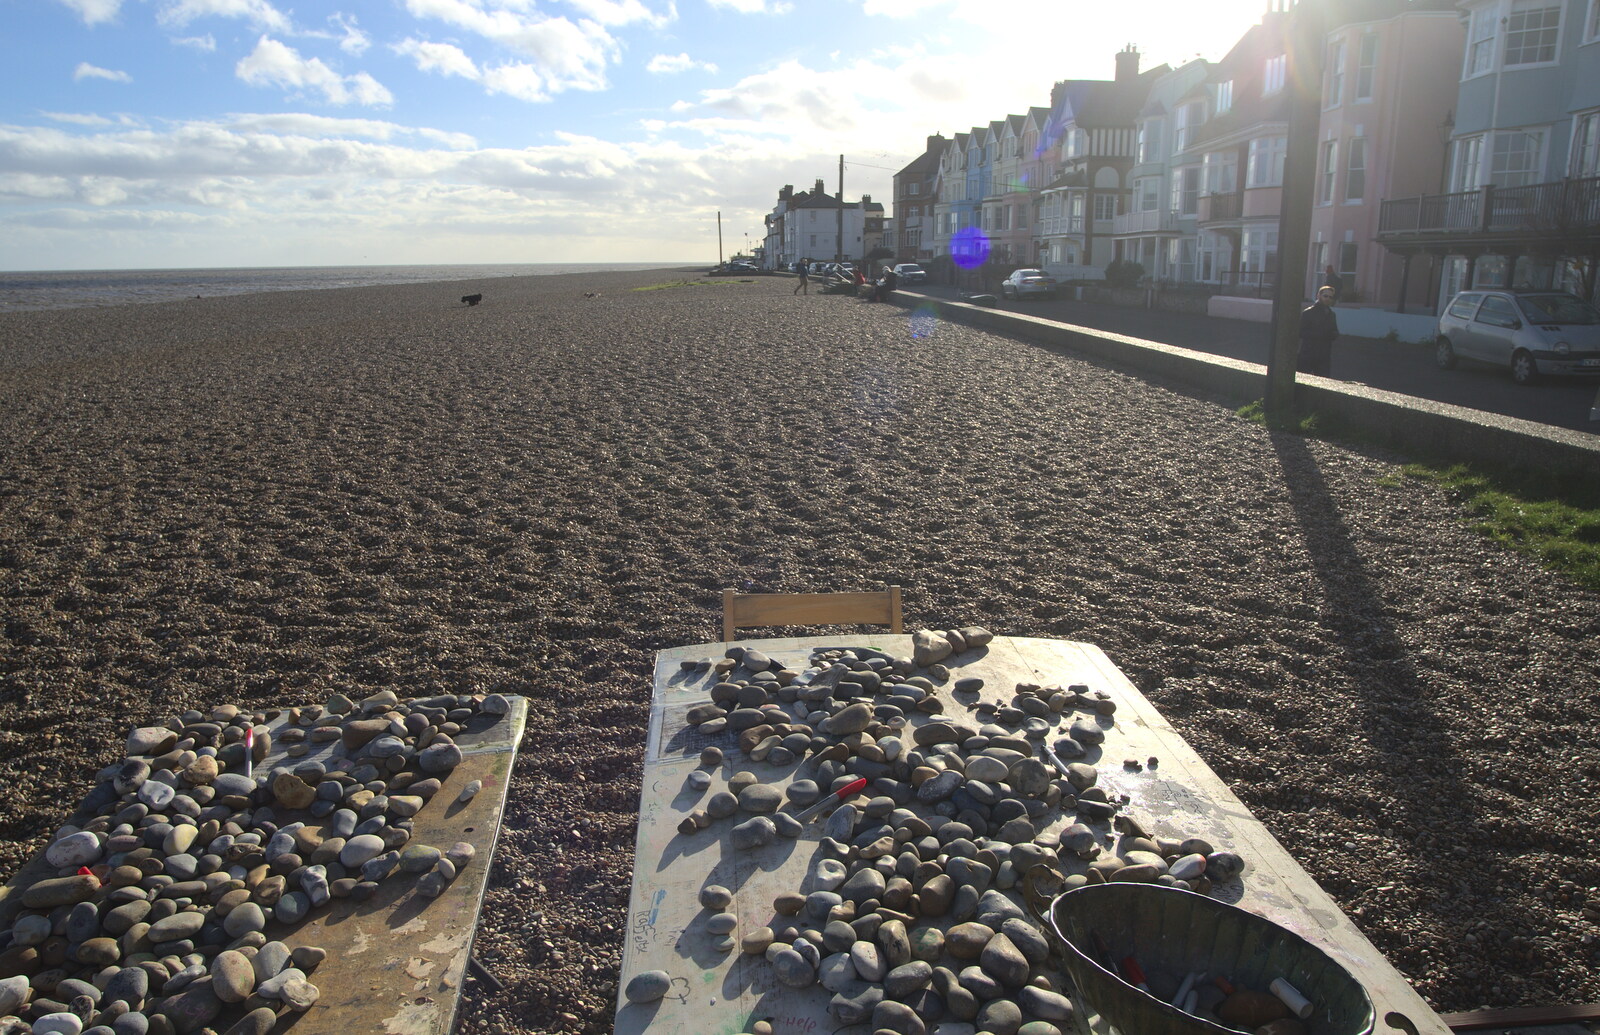 Like pebbles on the beach, kicked around by feet from A Trip to Aldeburgh, Suffolk - 7th February 2016